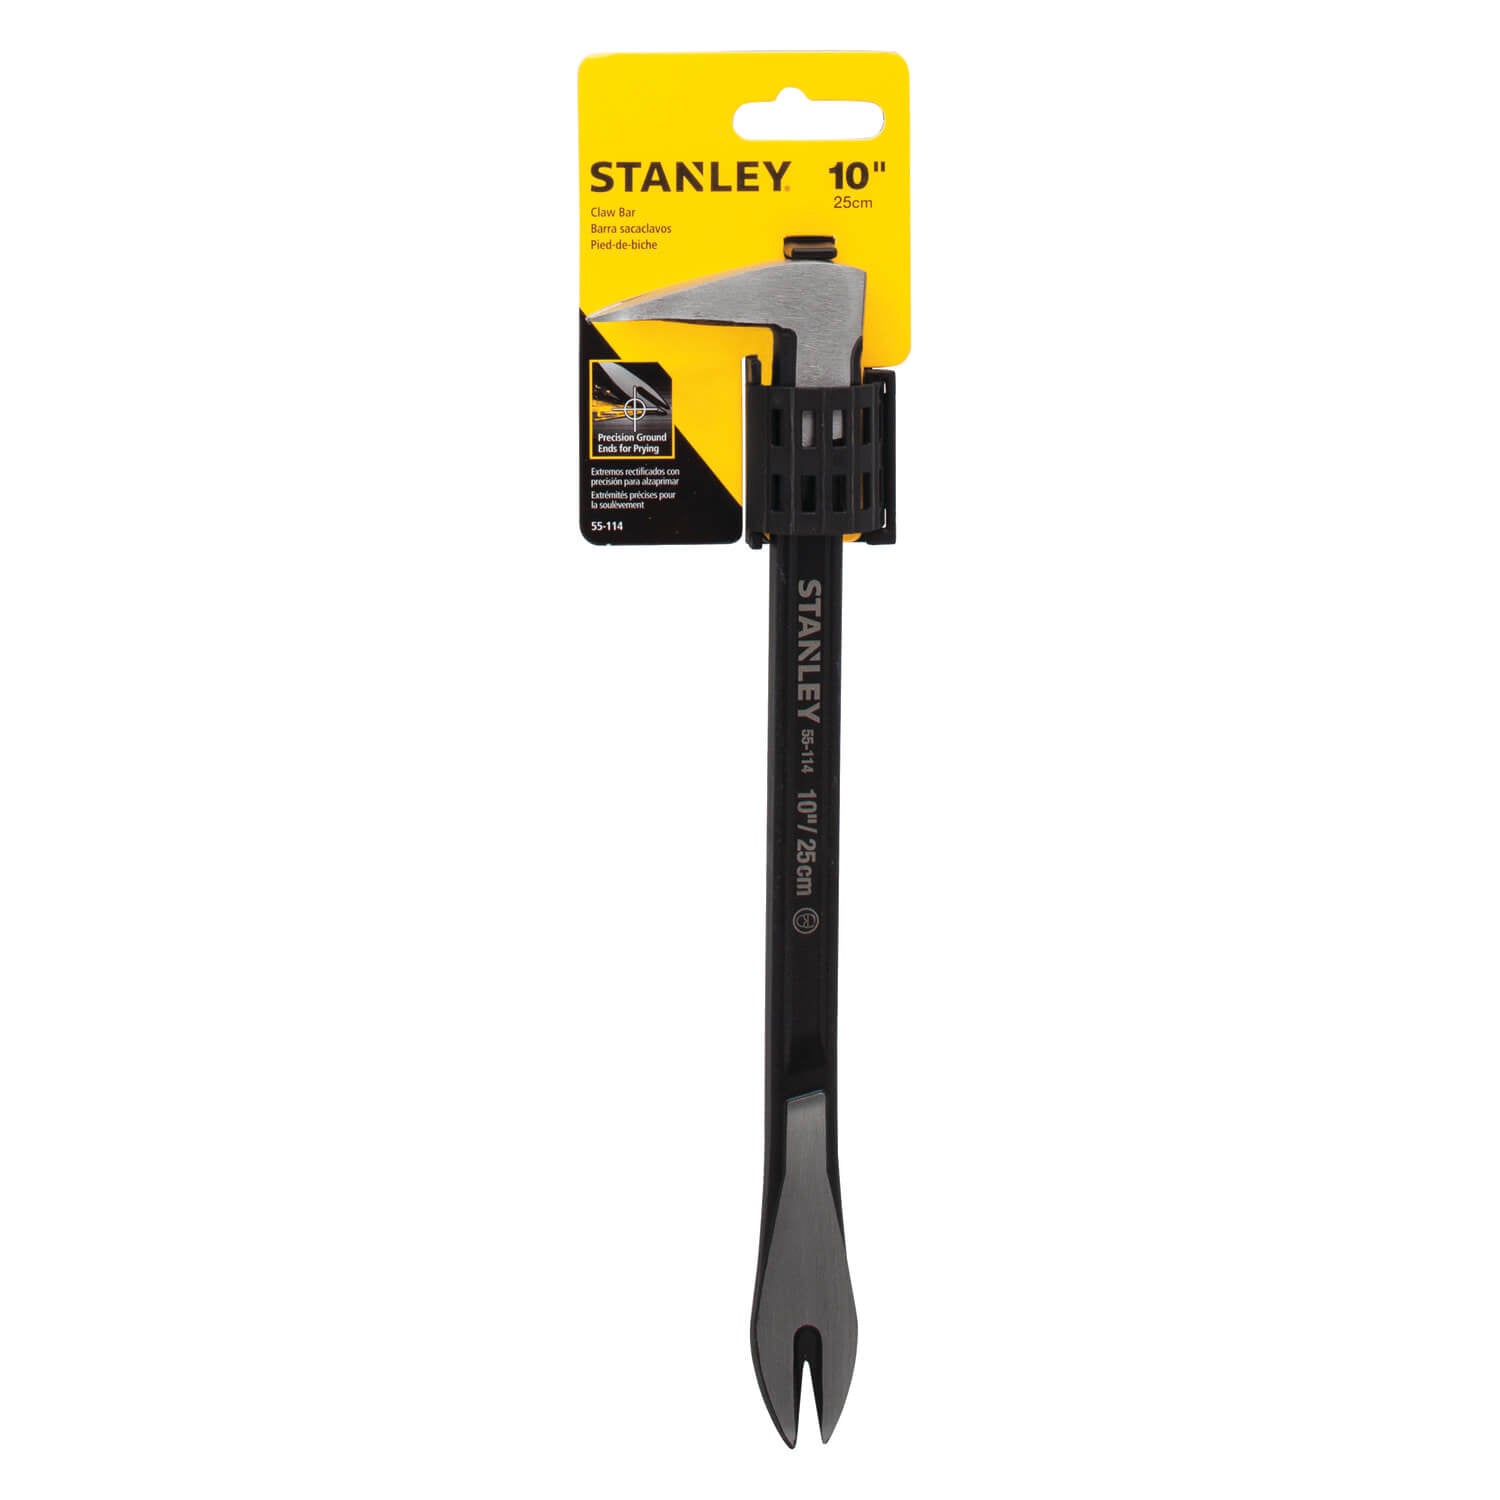 STANLEY  55-114   -  10 IN PRECISION CLAW BAR - wise-line-tools